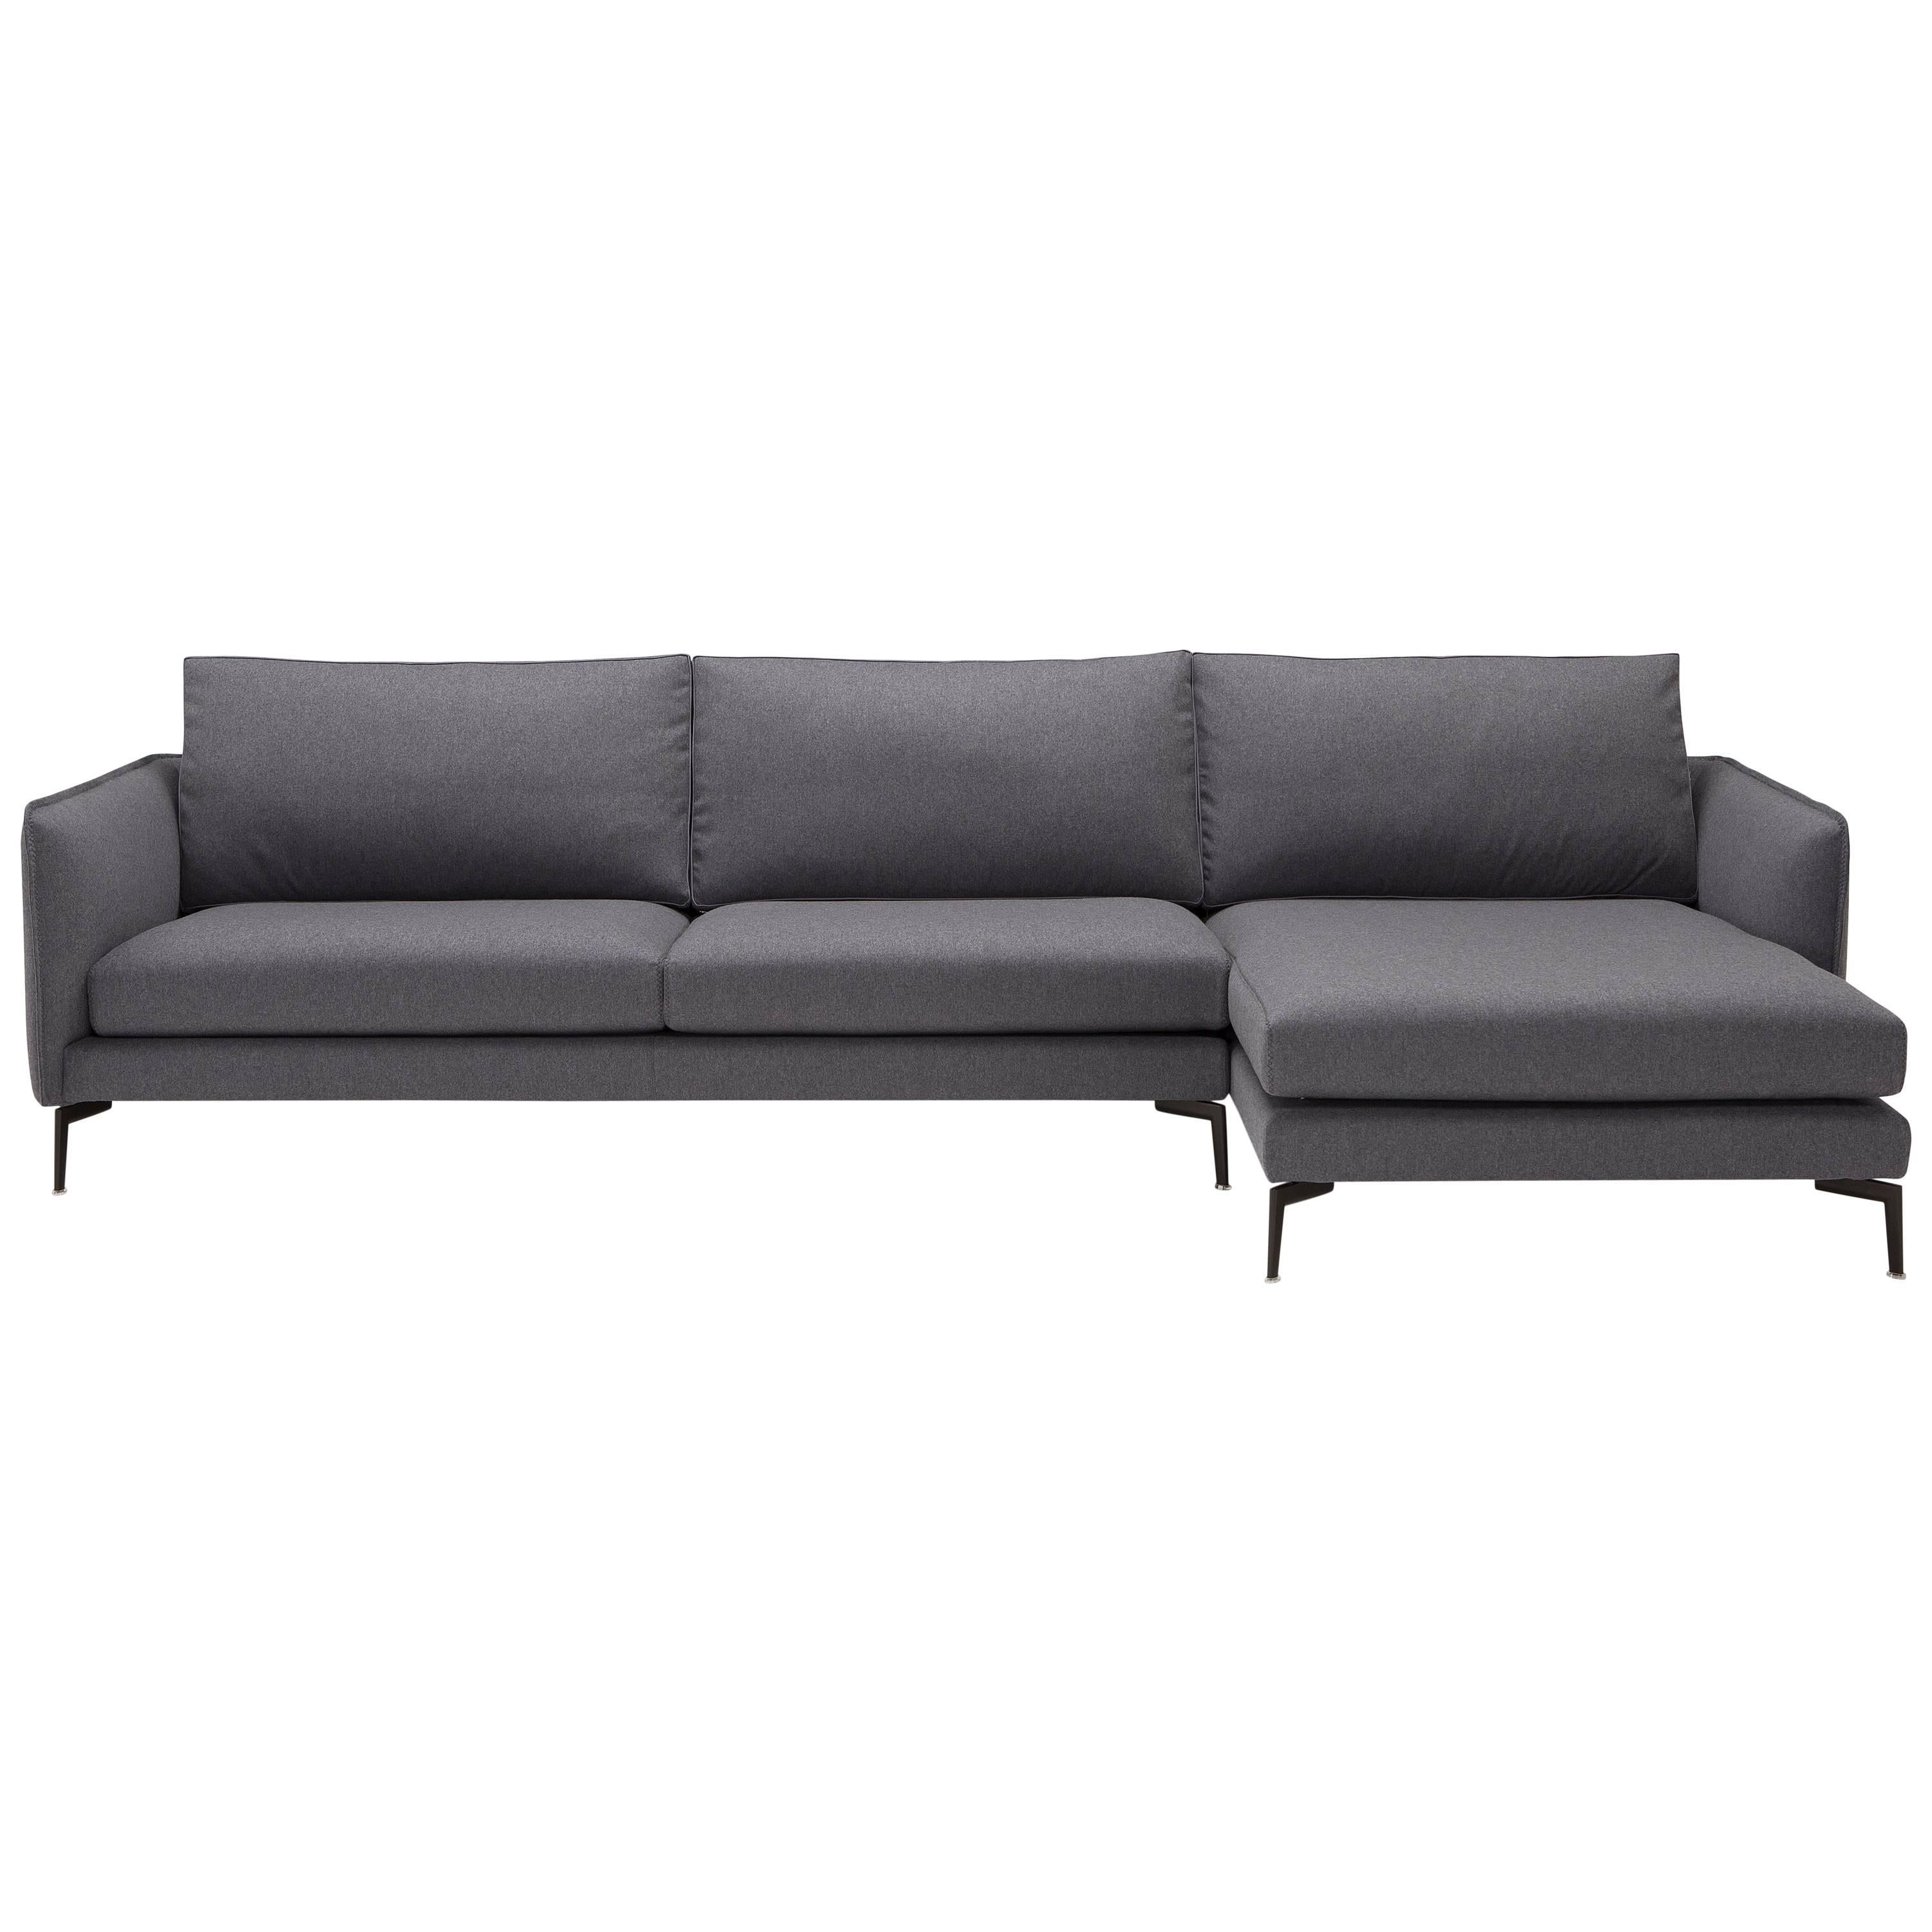 Barnaby Composition Sofa in Charcoal Gray by Amura Lab For Sale